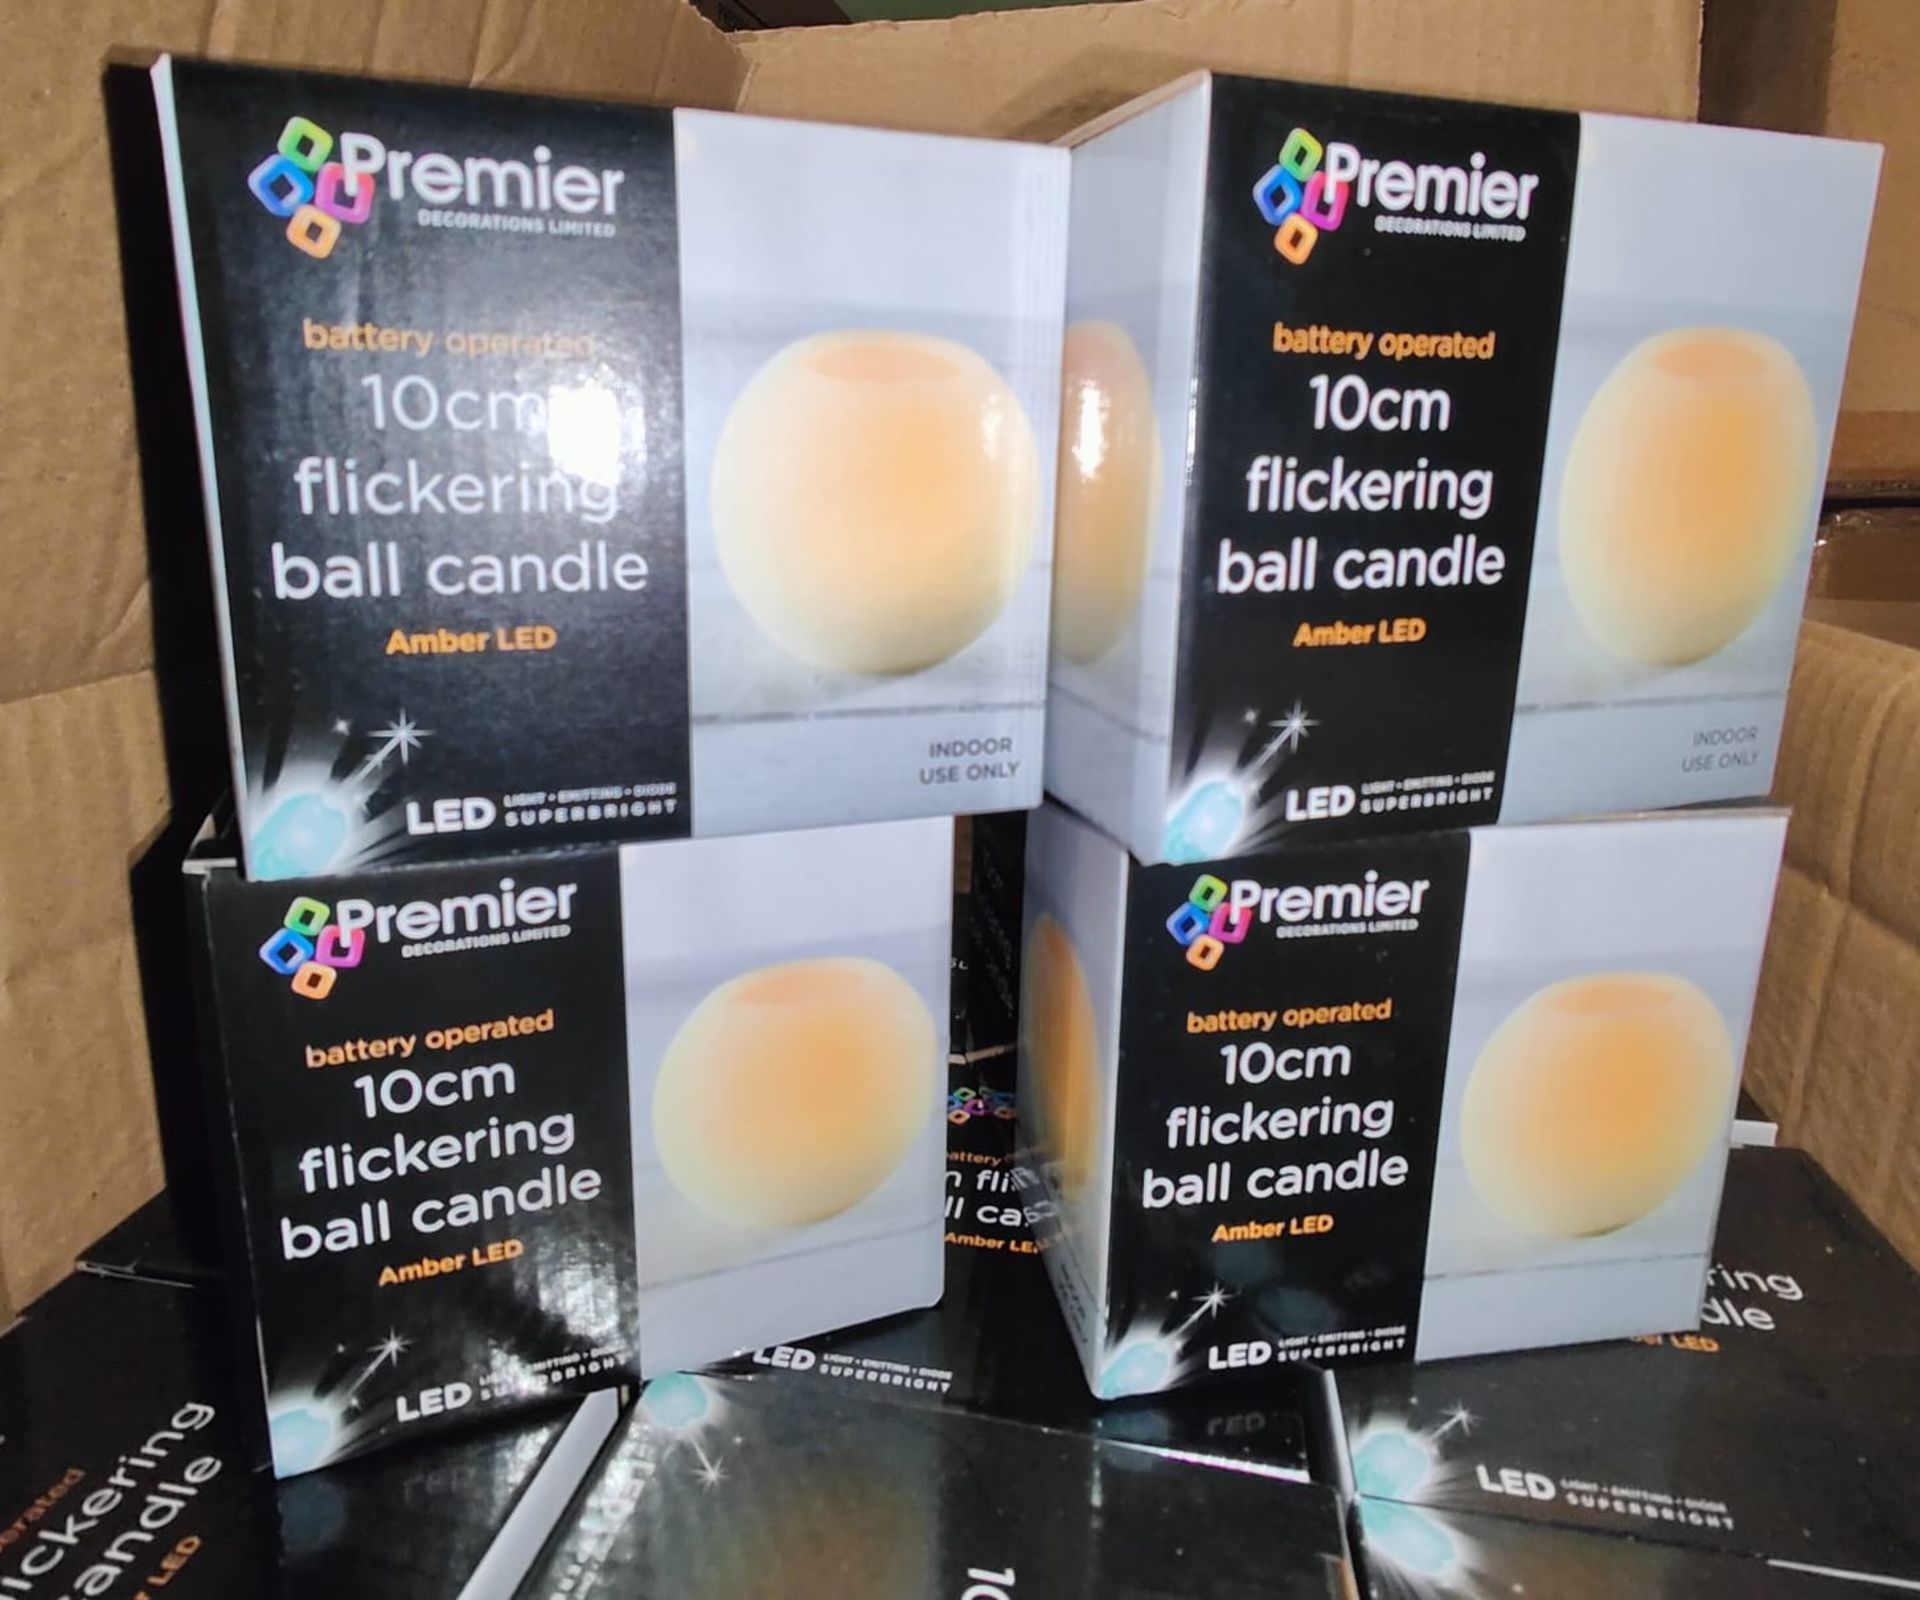 36 x 10cm Flickering Ball Candle - Amber LED - Battery operated